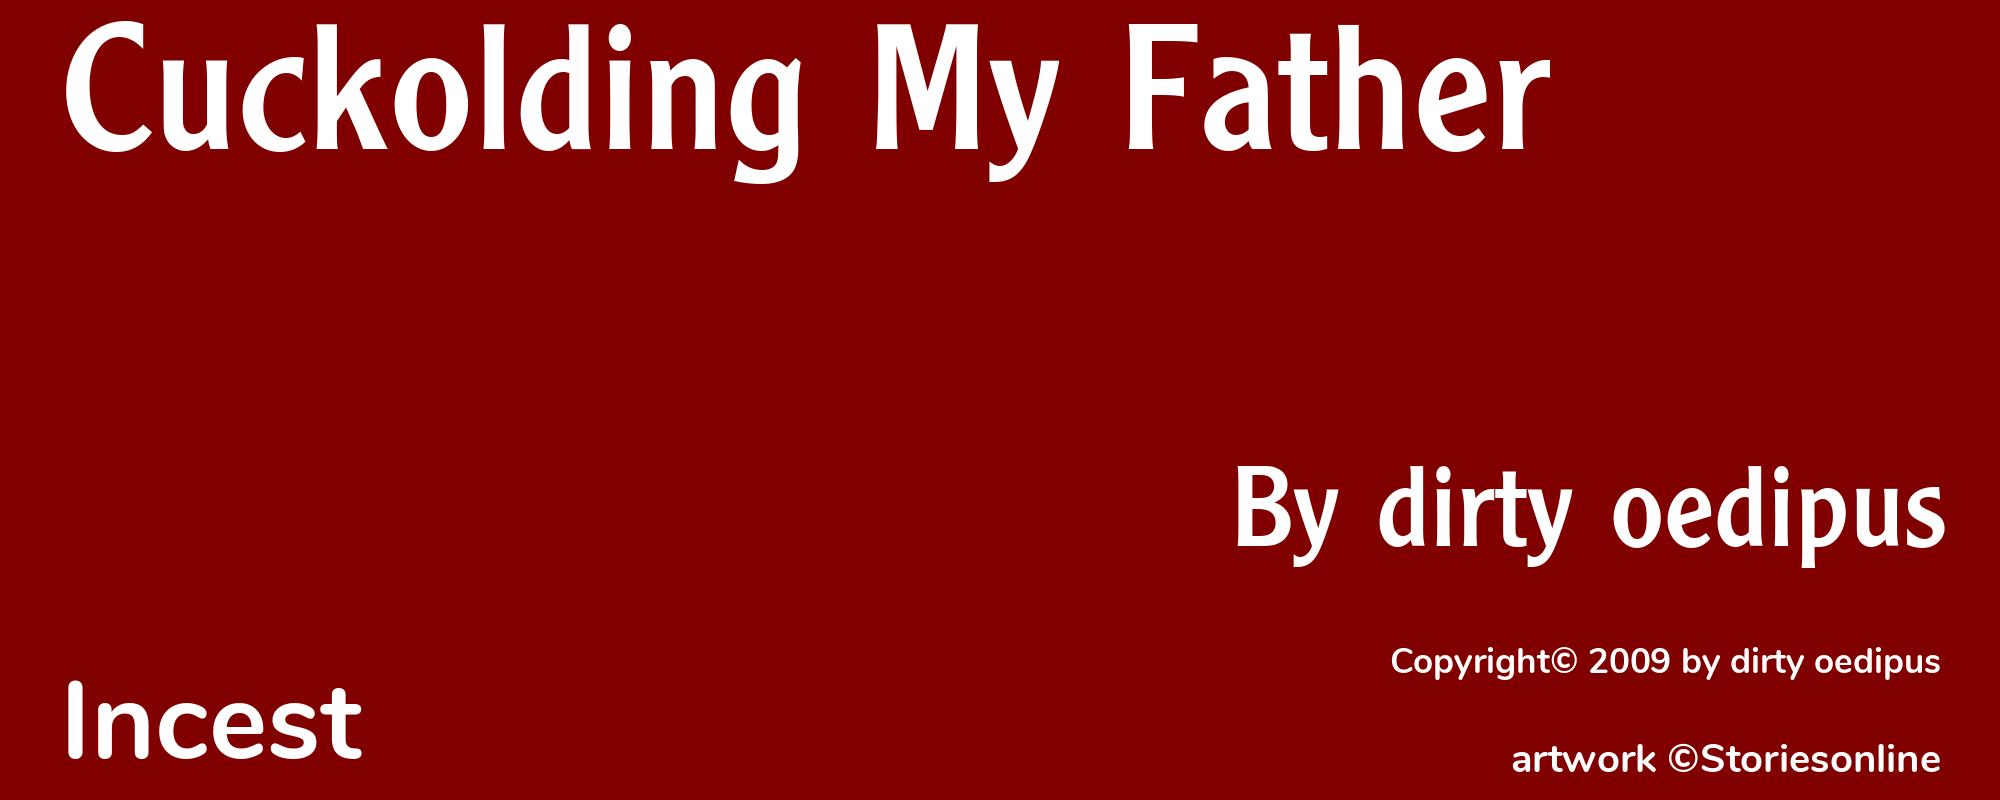 Cuckolding My Father - Cover